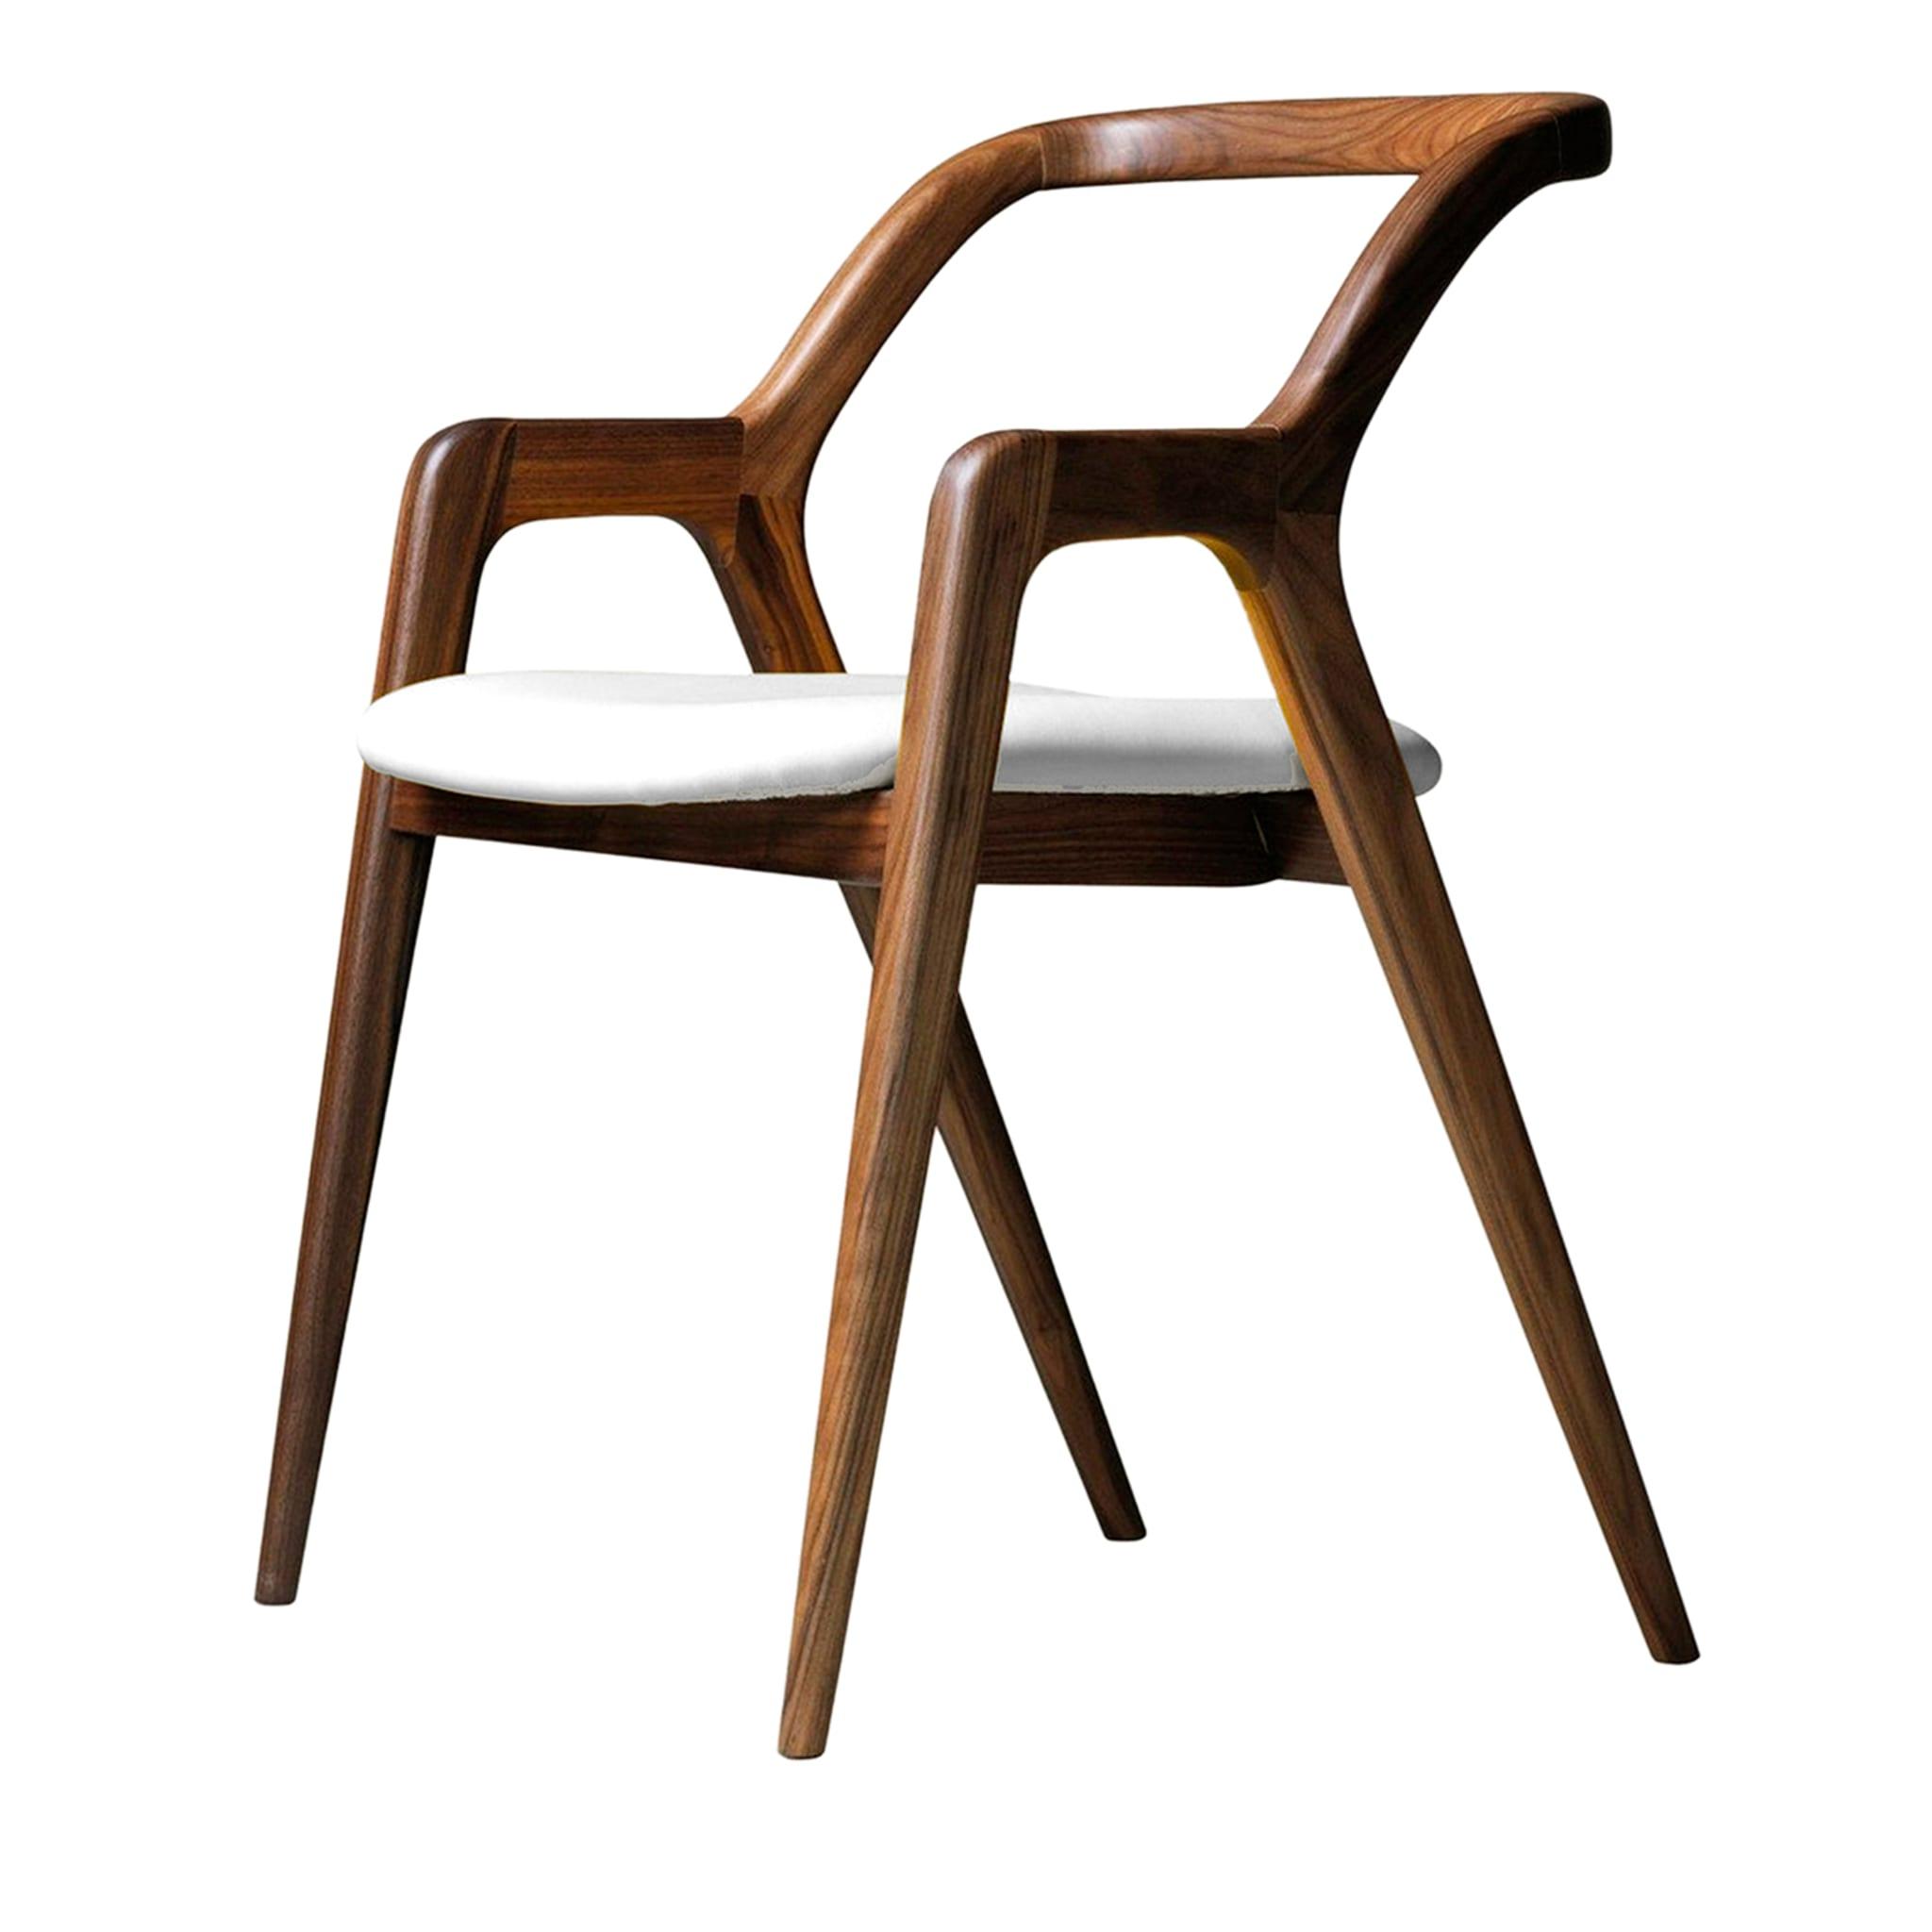 In Breve Natural Solid Walnut Chair ☞ Upholstery: Leather PANDORA 620